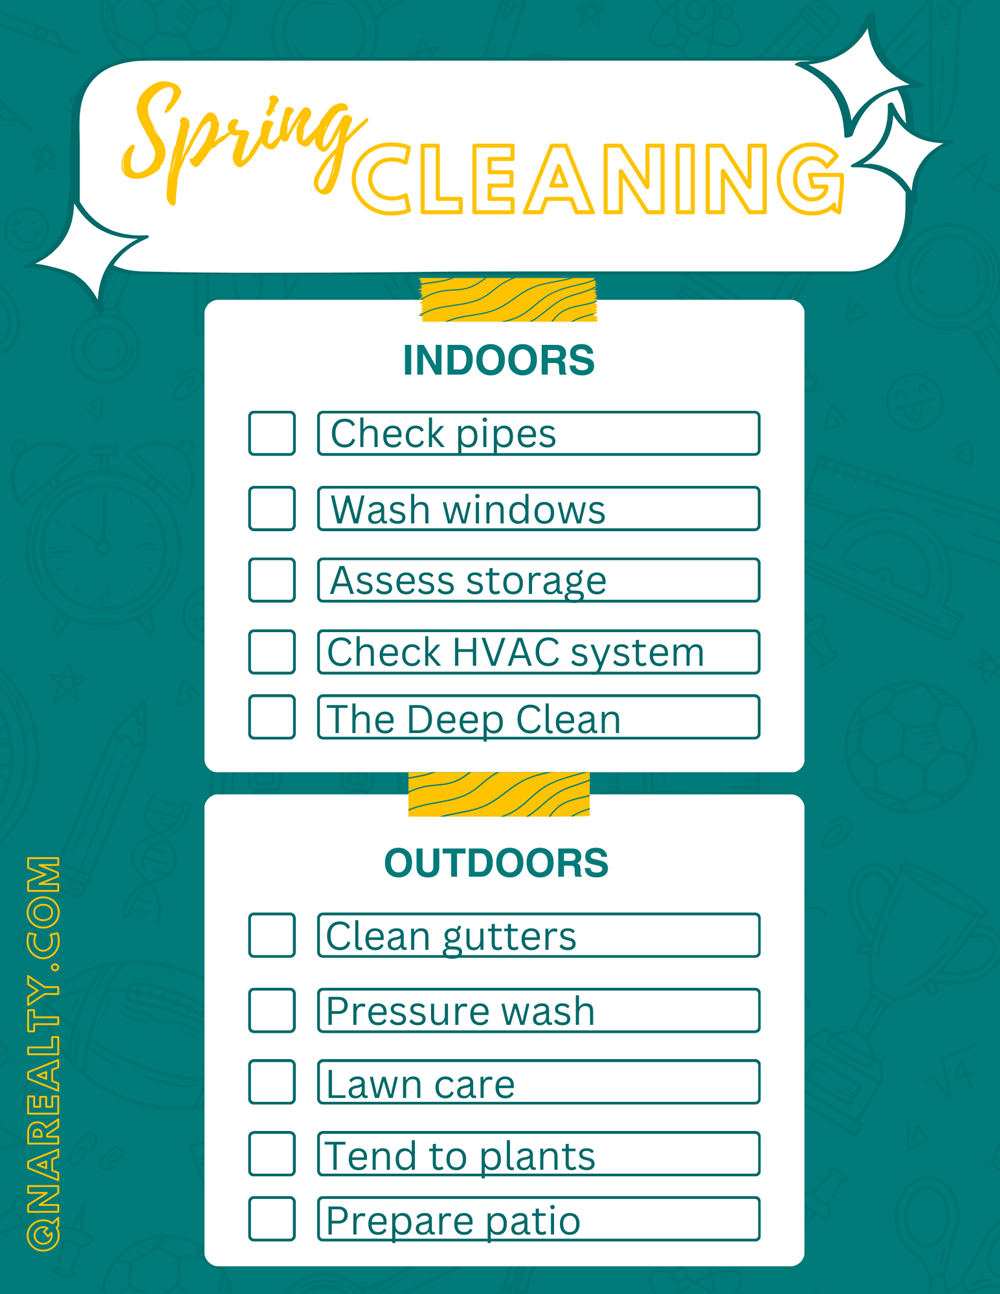 Save this Spring Cleaning Checklist.